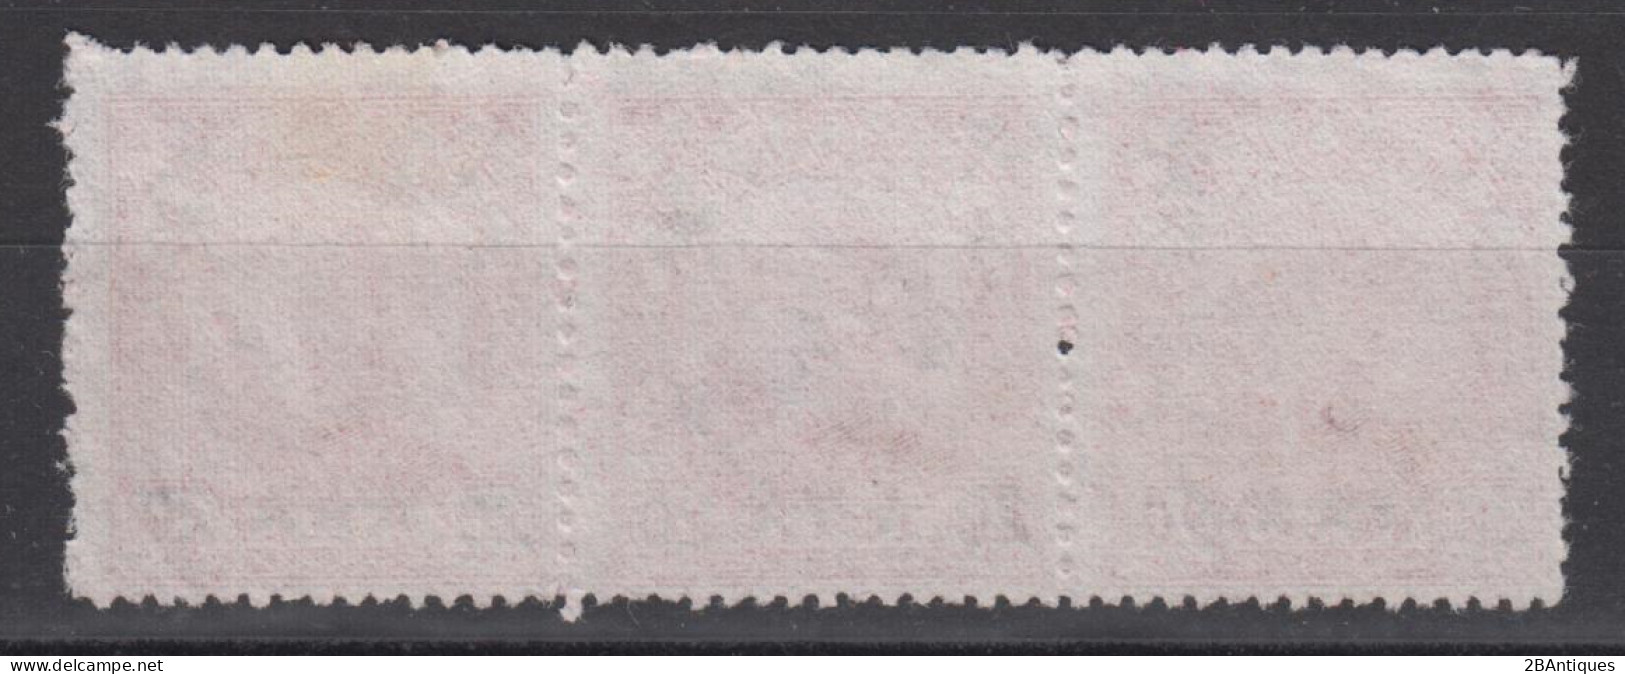 TAIWAN 1949-1950 - North East China Postage Stamps Surcharged STRIP OF 3 - Oblitérés